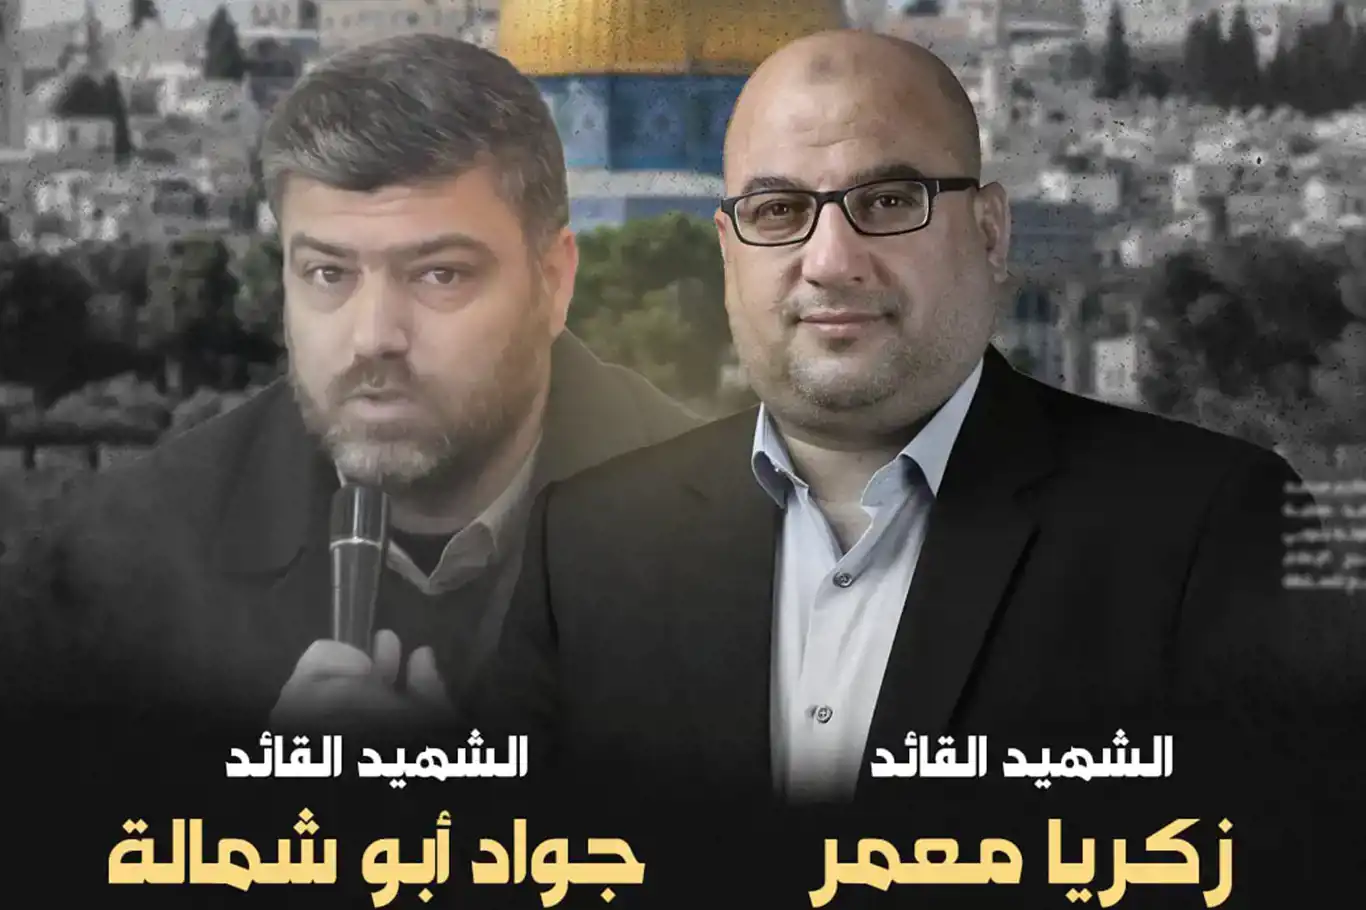 Two Hamas leaders killed in zionist regime’s attack on Gaza